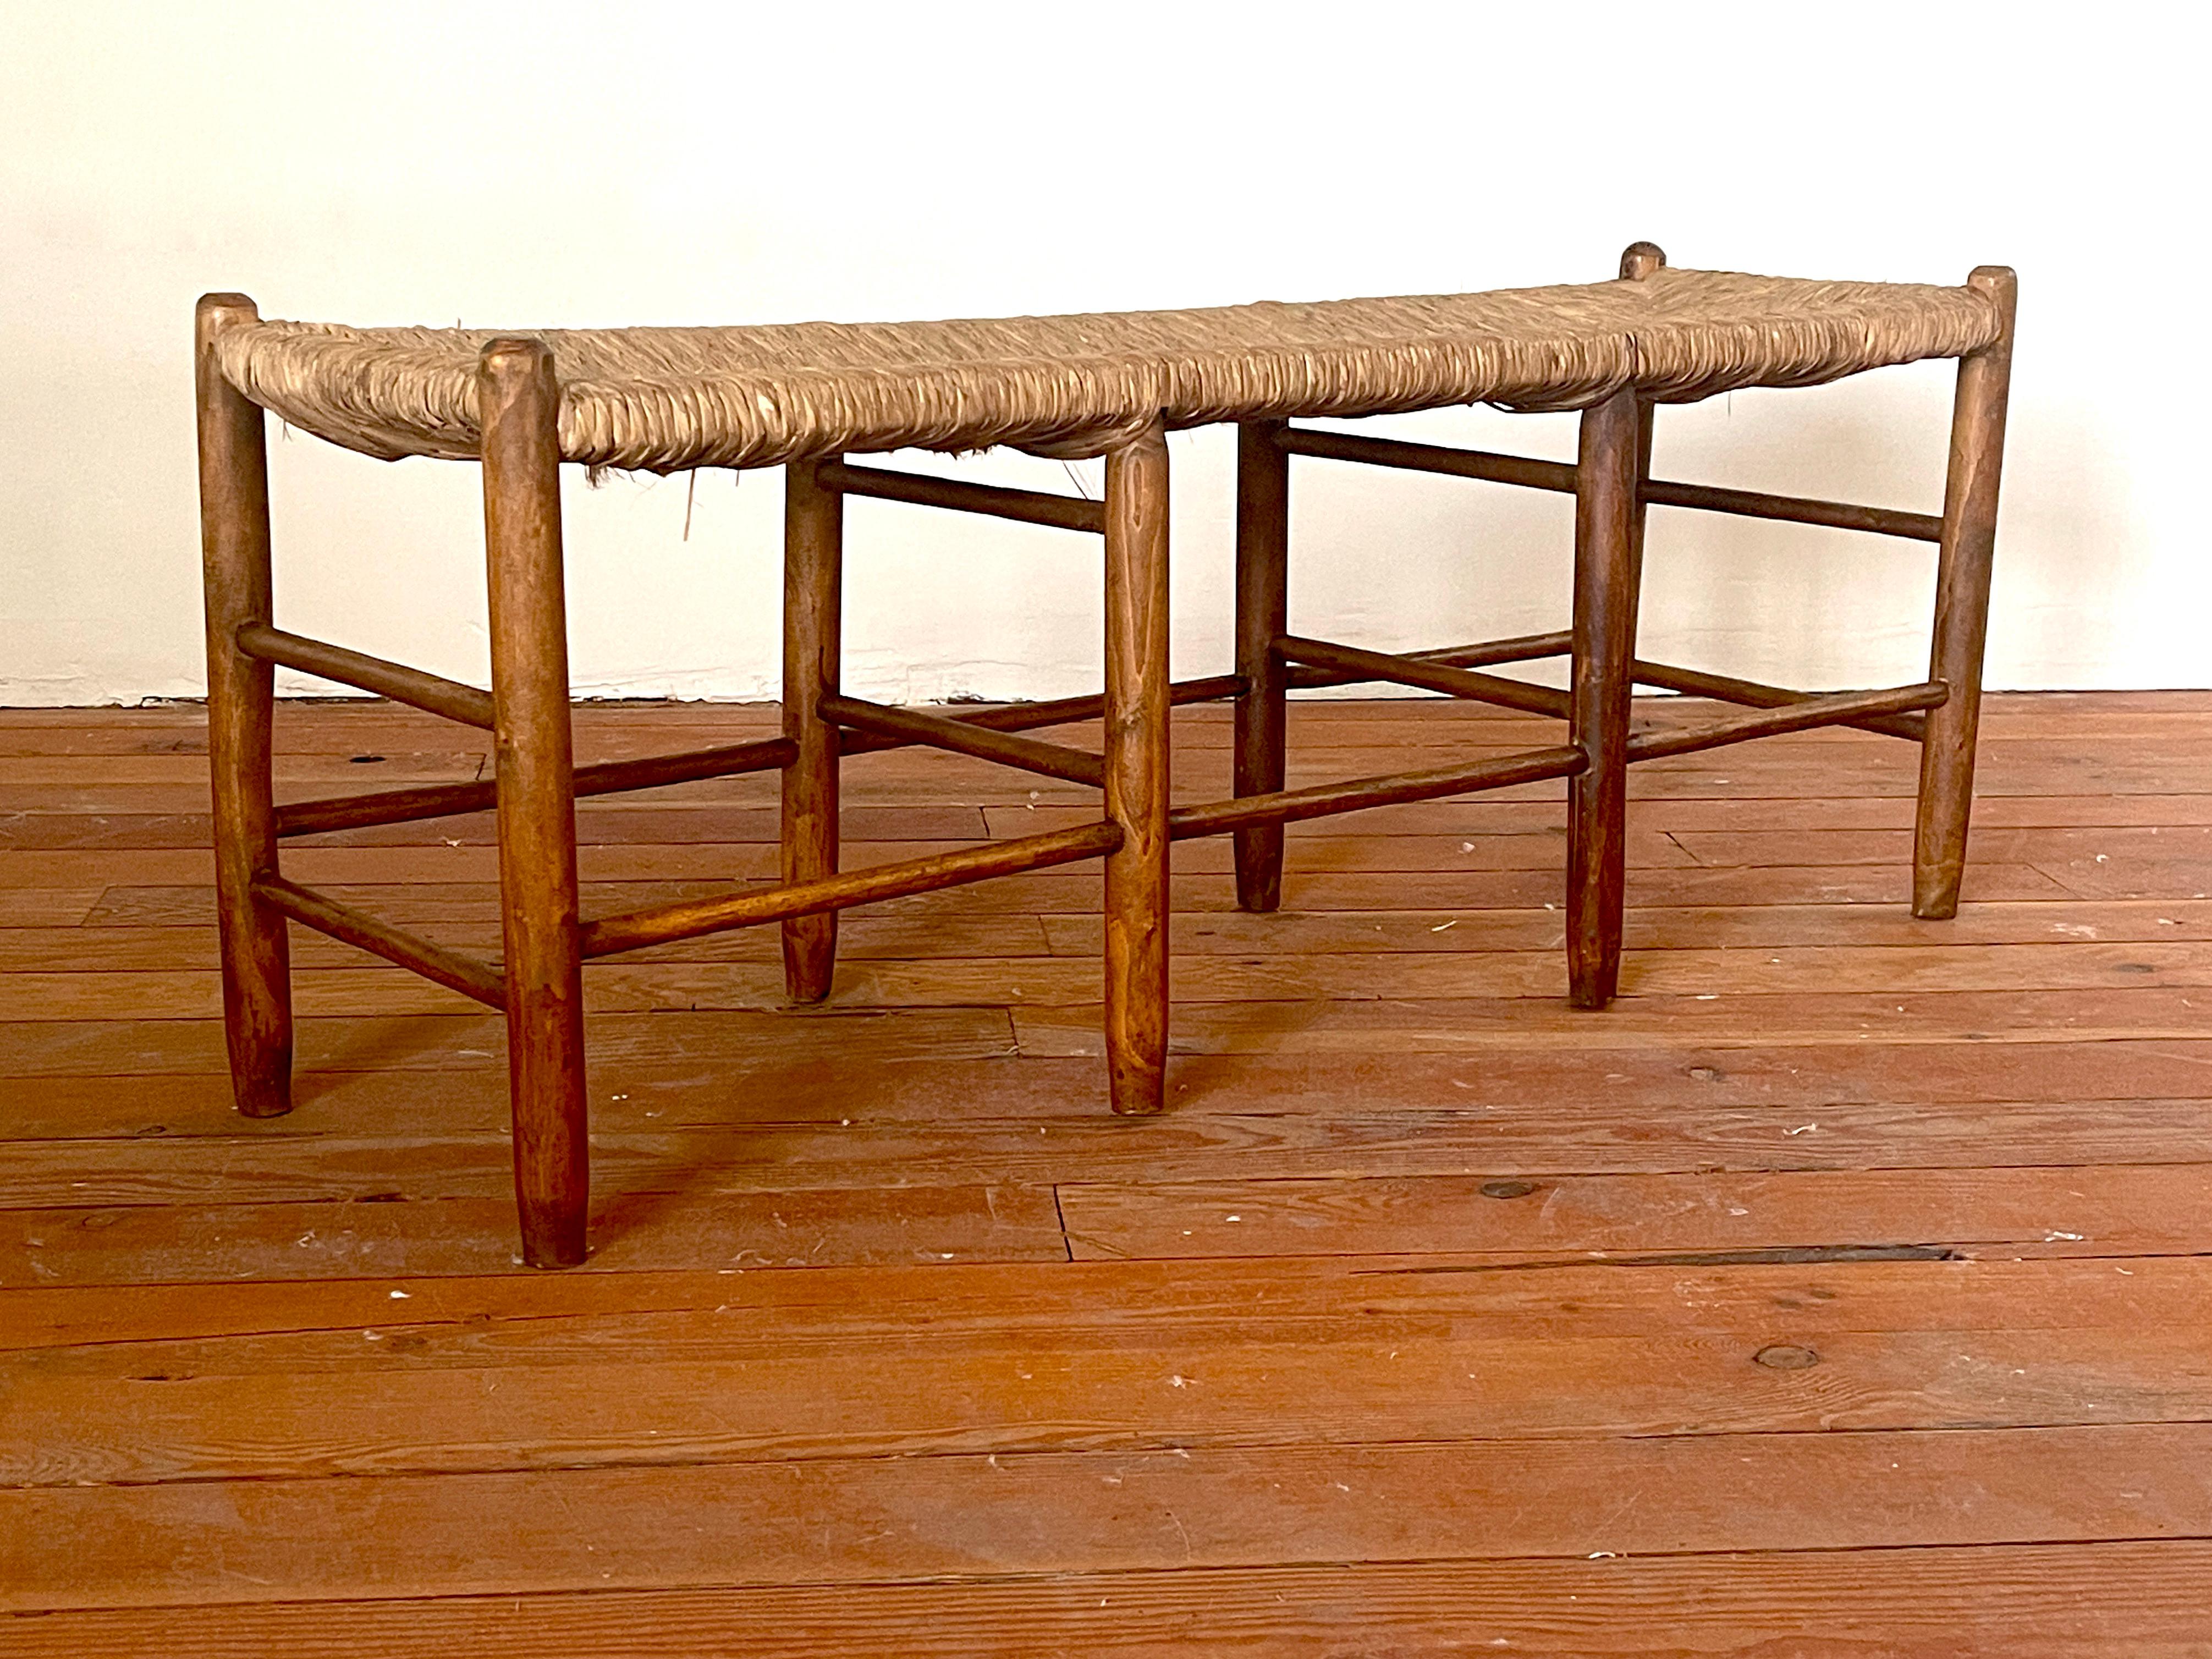 Great woven seat bench in the style of Charlotte Perriand
Simple lines with oak and rushed seat.